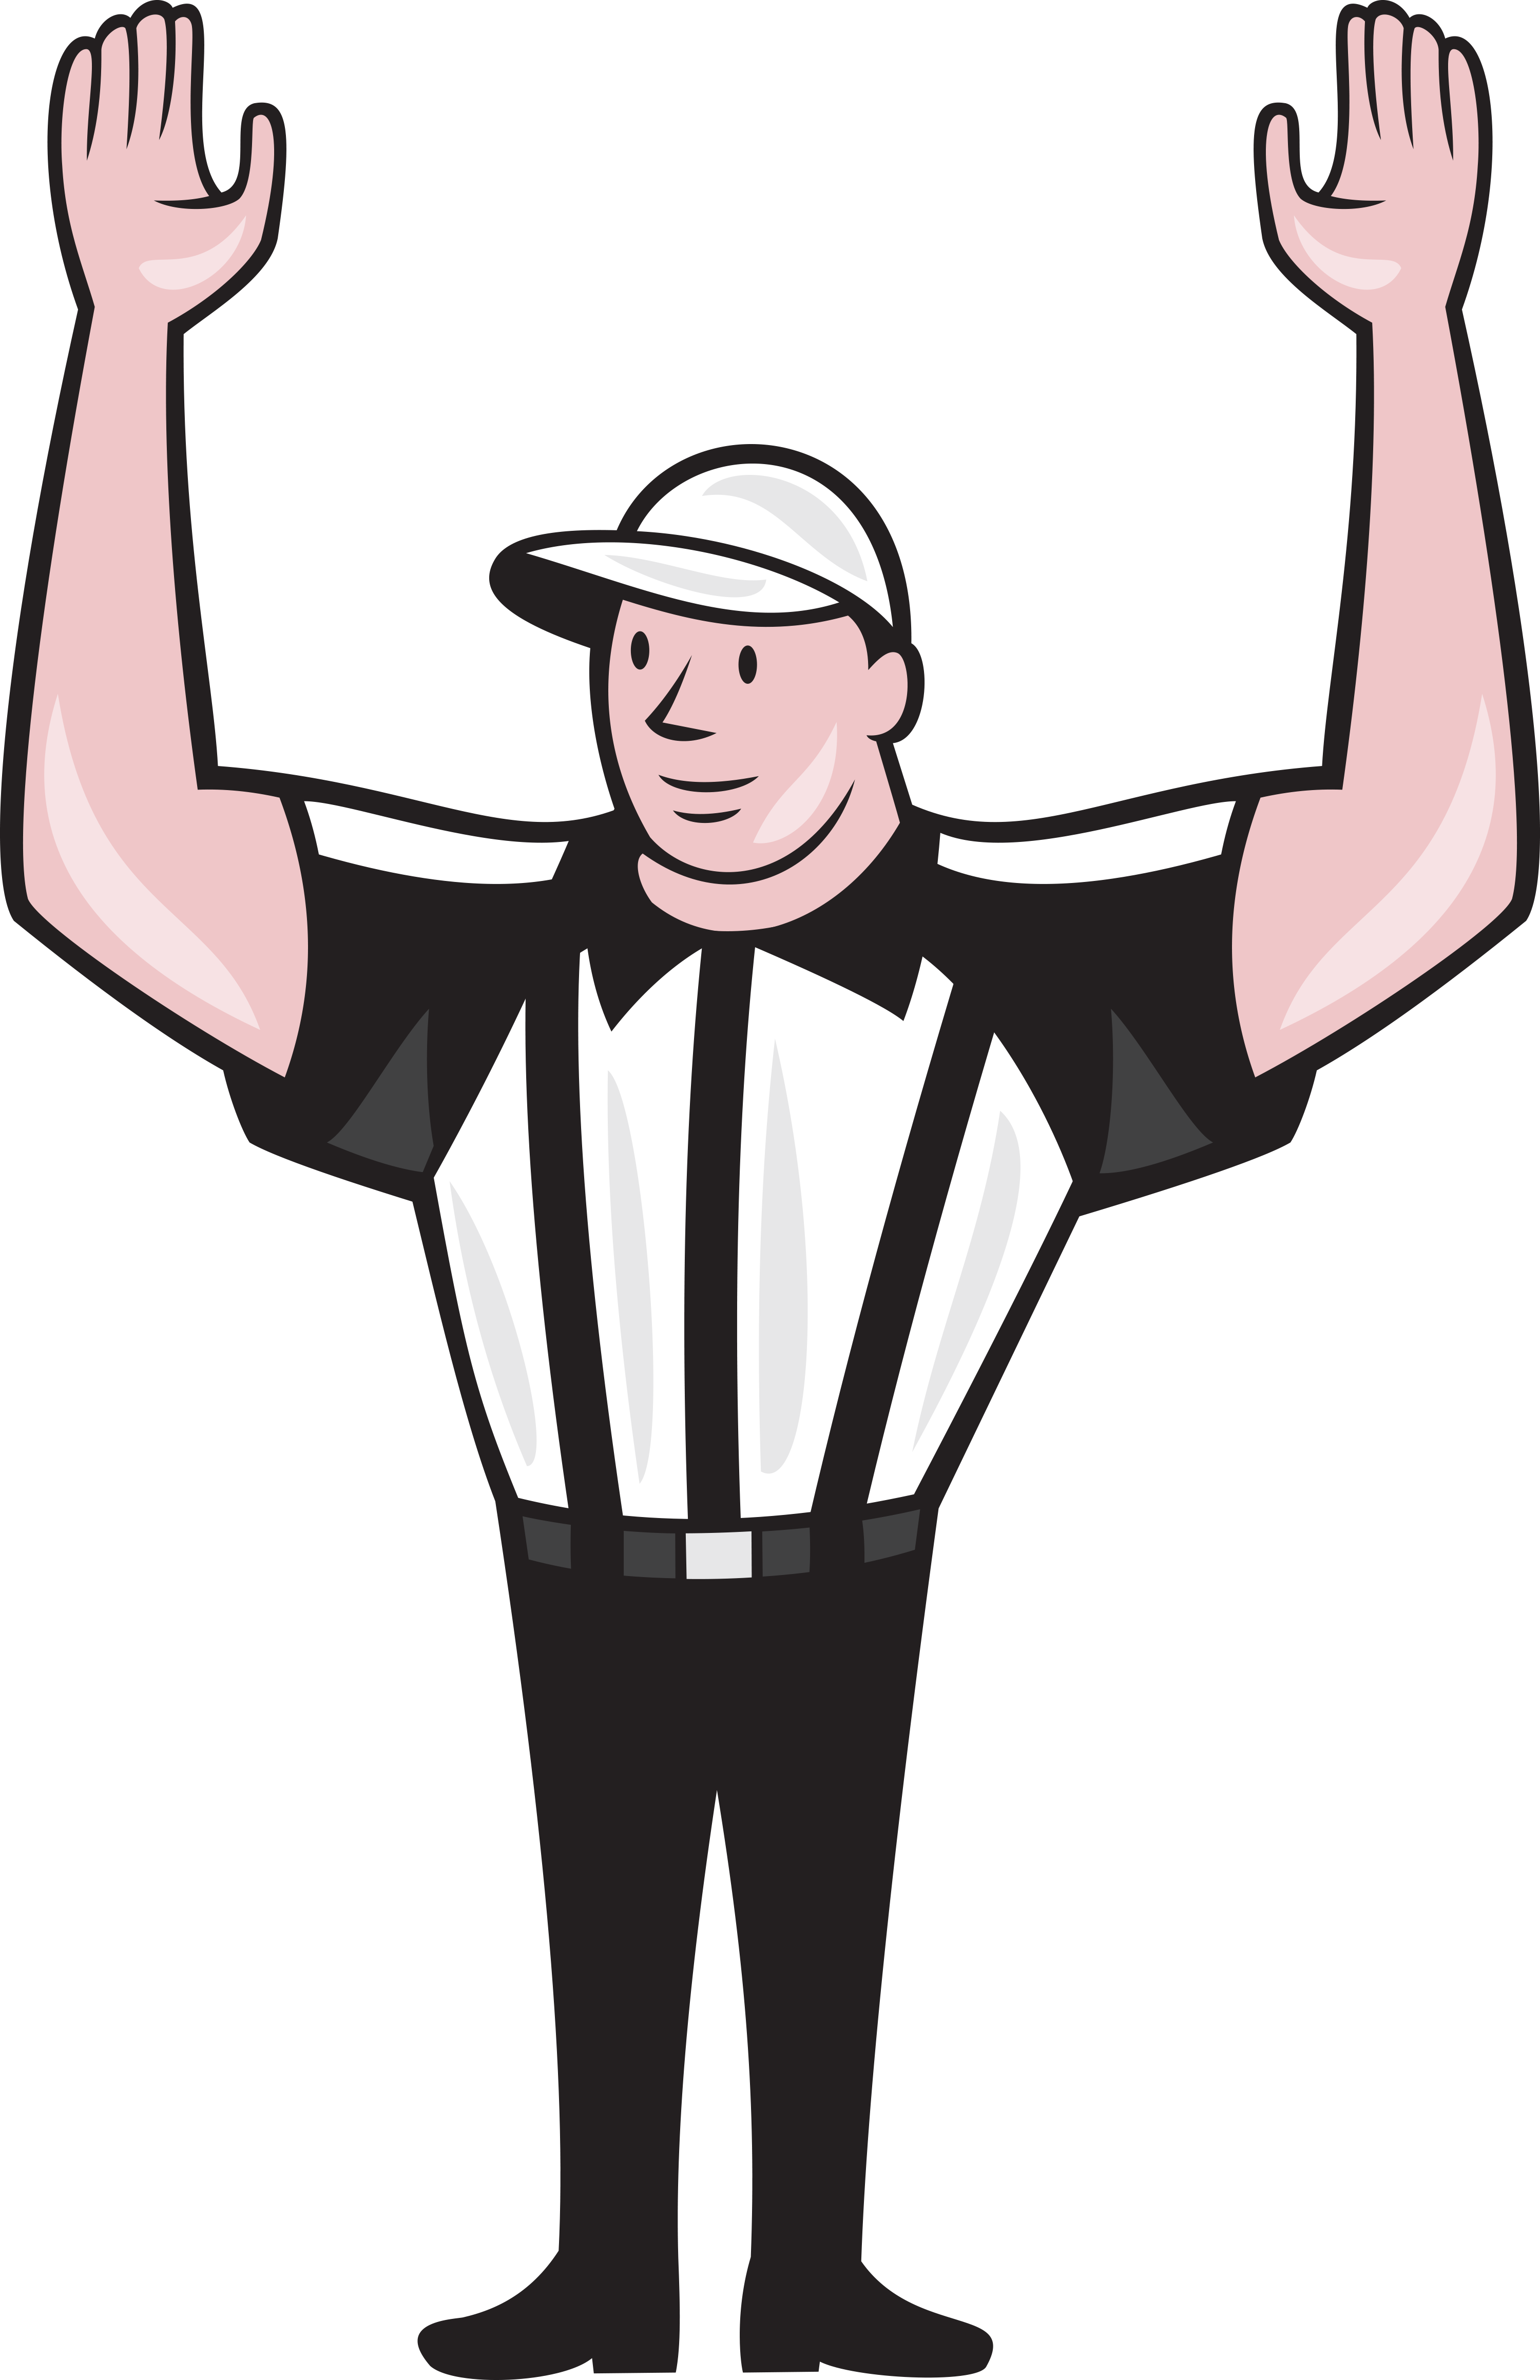 American-football-referee-frnt-touchdown-ol-051414, Ref PNG - Free PNG